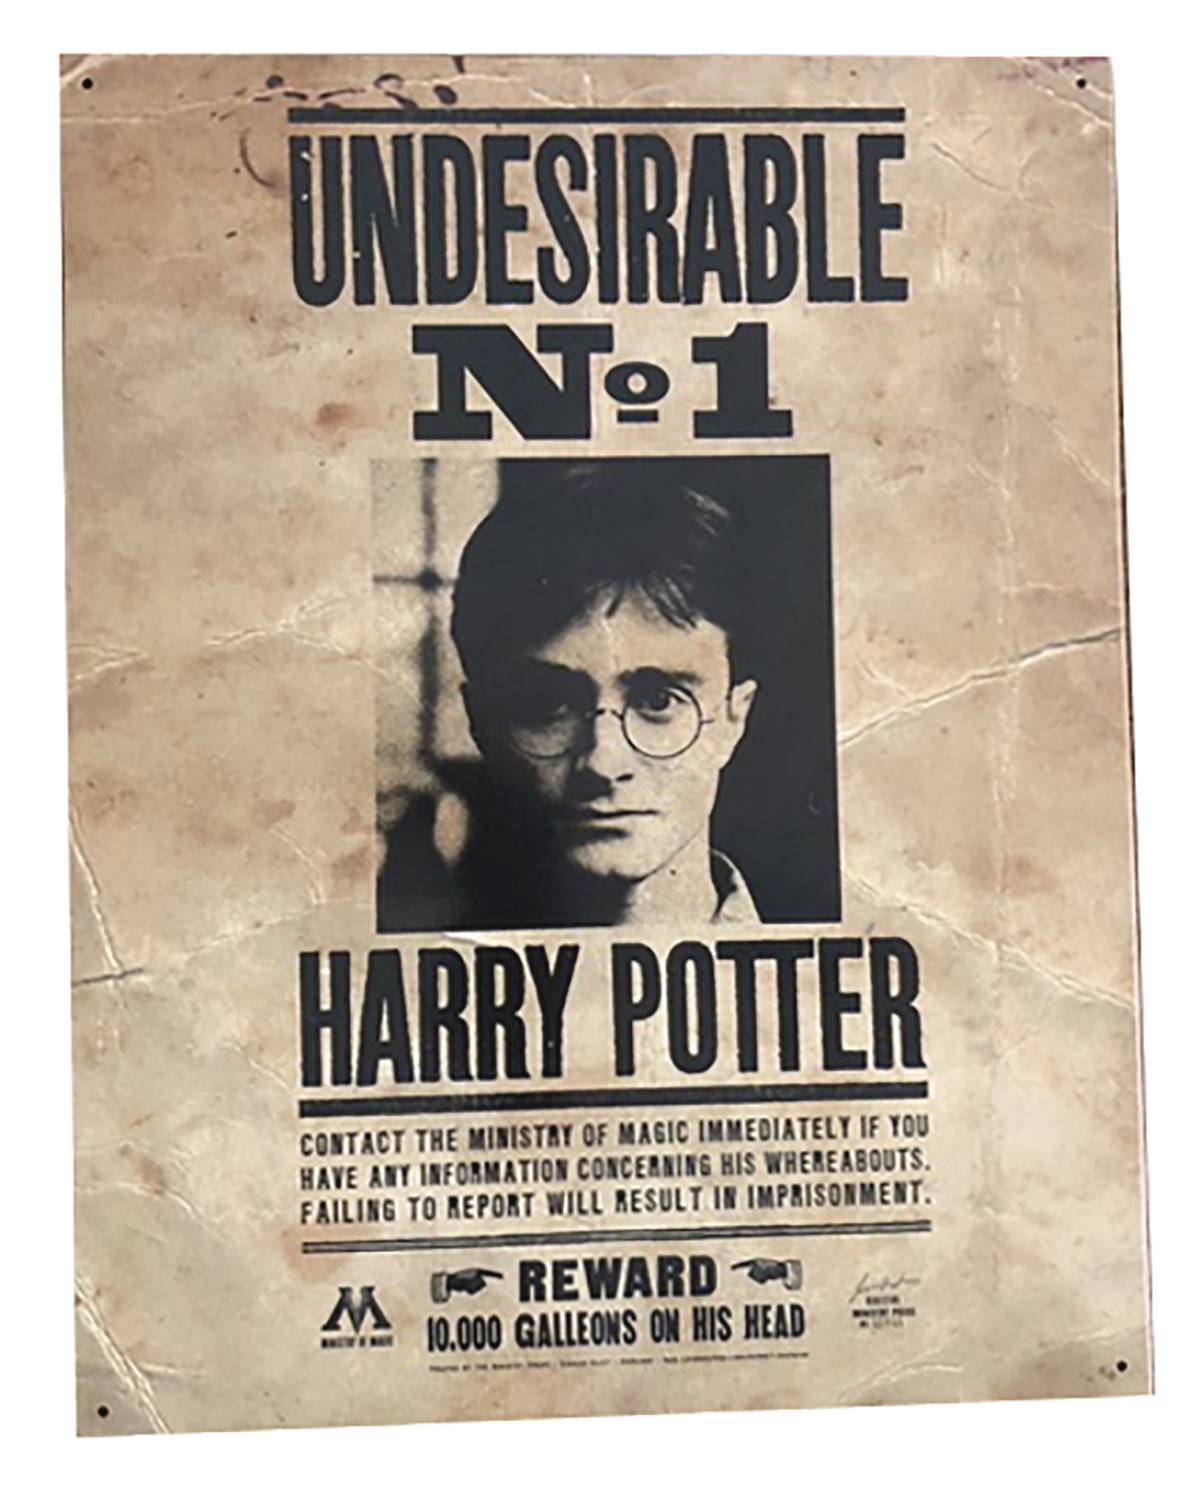 HARRY POTTER NUMBER ONE UNDESIRABLE 12X16 TIN SIGN